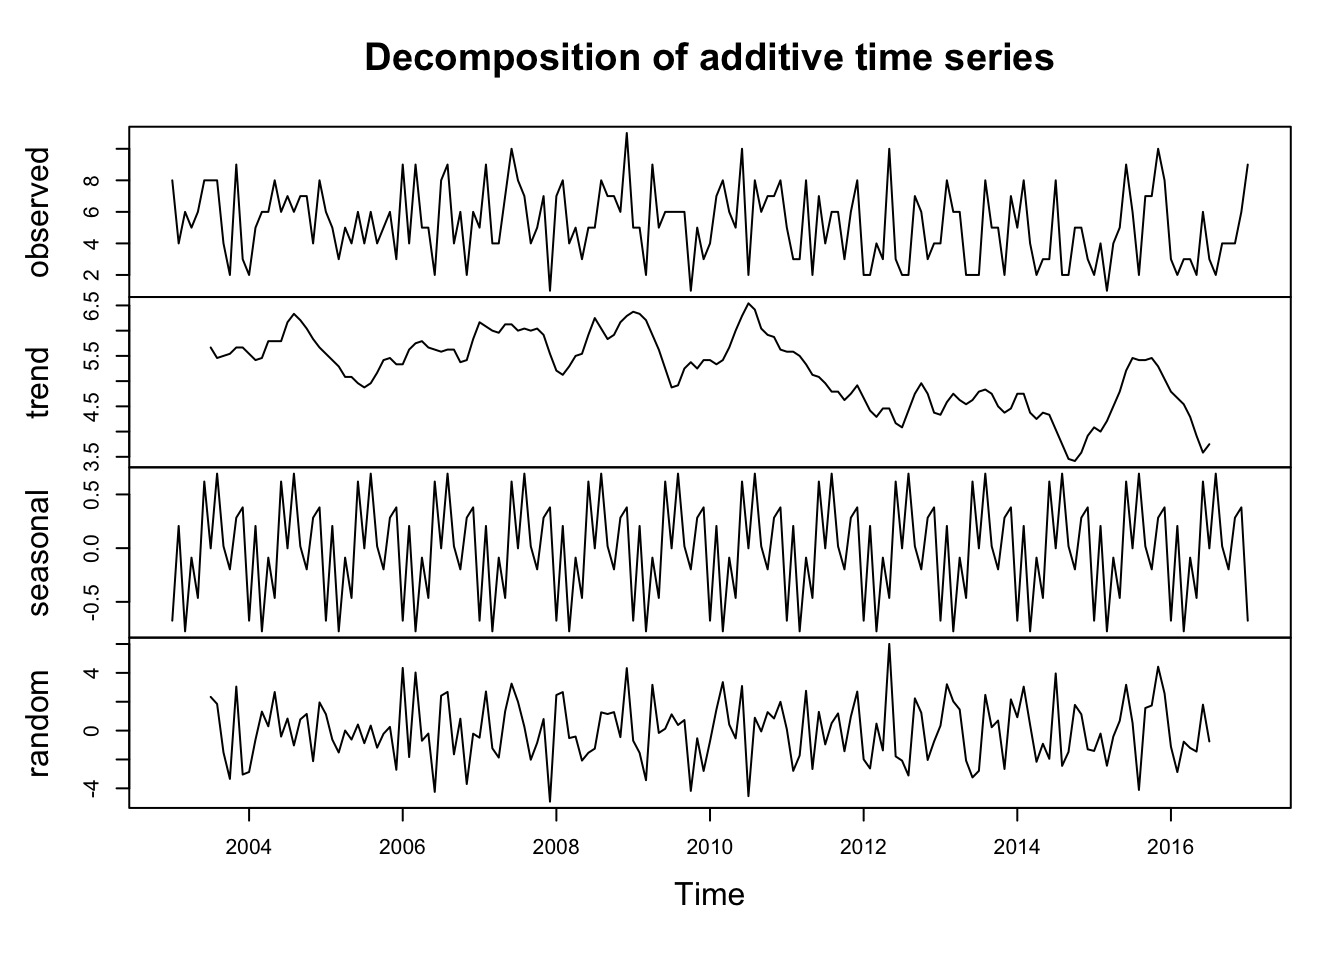 A plot which is actually four plots tiled vertically, is labeled 'Decomposition of additive time series'. Each of the four plots has its own vertical axis, labeled 'observed', 'trend', 'seasonal', and 'random'. The horizontal axis is as in the previous figure, 'Time' ranging from 2004 to 2016. The 'observed' plot is a vertically squished copy of the previous plot. The 'trend' plot, ranging from three point five to six point five, is a relatively noise-free line. This plot stays above five and below six point five from 2004 to 2011, then gradually drops to three point five in 2015, before a small peak over five and dropping back down in 2016. The 'seasonal' plot is a yearly periodic plot, ranging from under negative point five to over point five, with each year having a peak in the middle. The 'random' plot ranges from negative four to positive four, and has high noise.